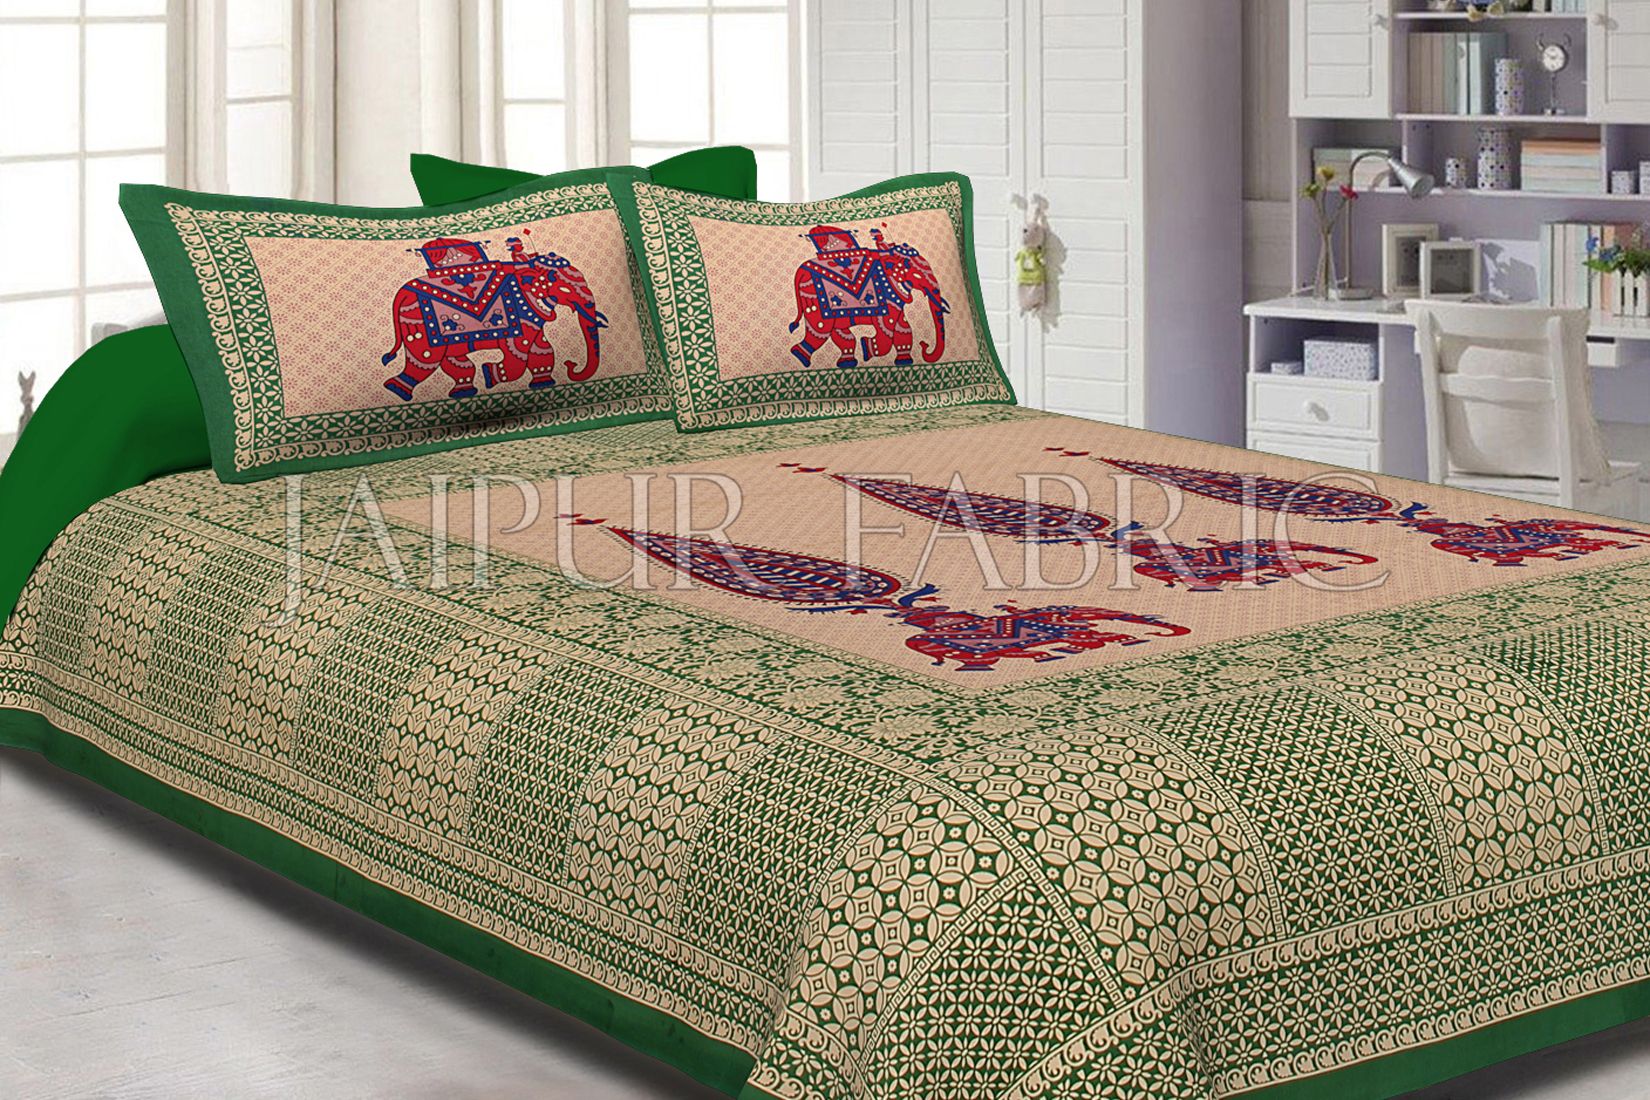 Green Border Leaf With Elephant Print Fine Cotton Double Bed Sheet